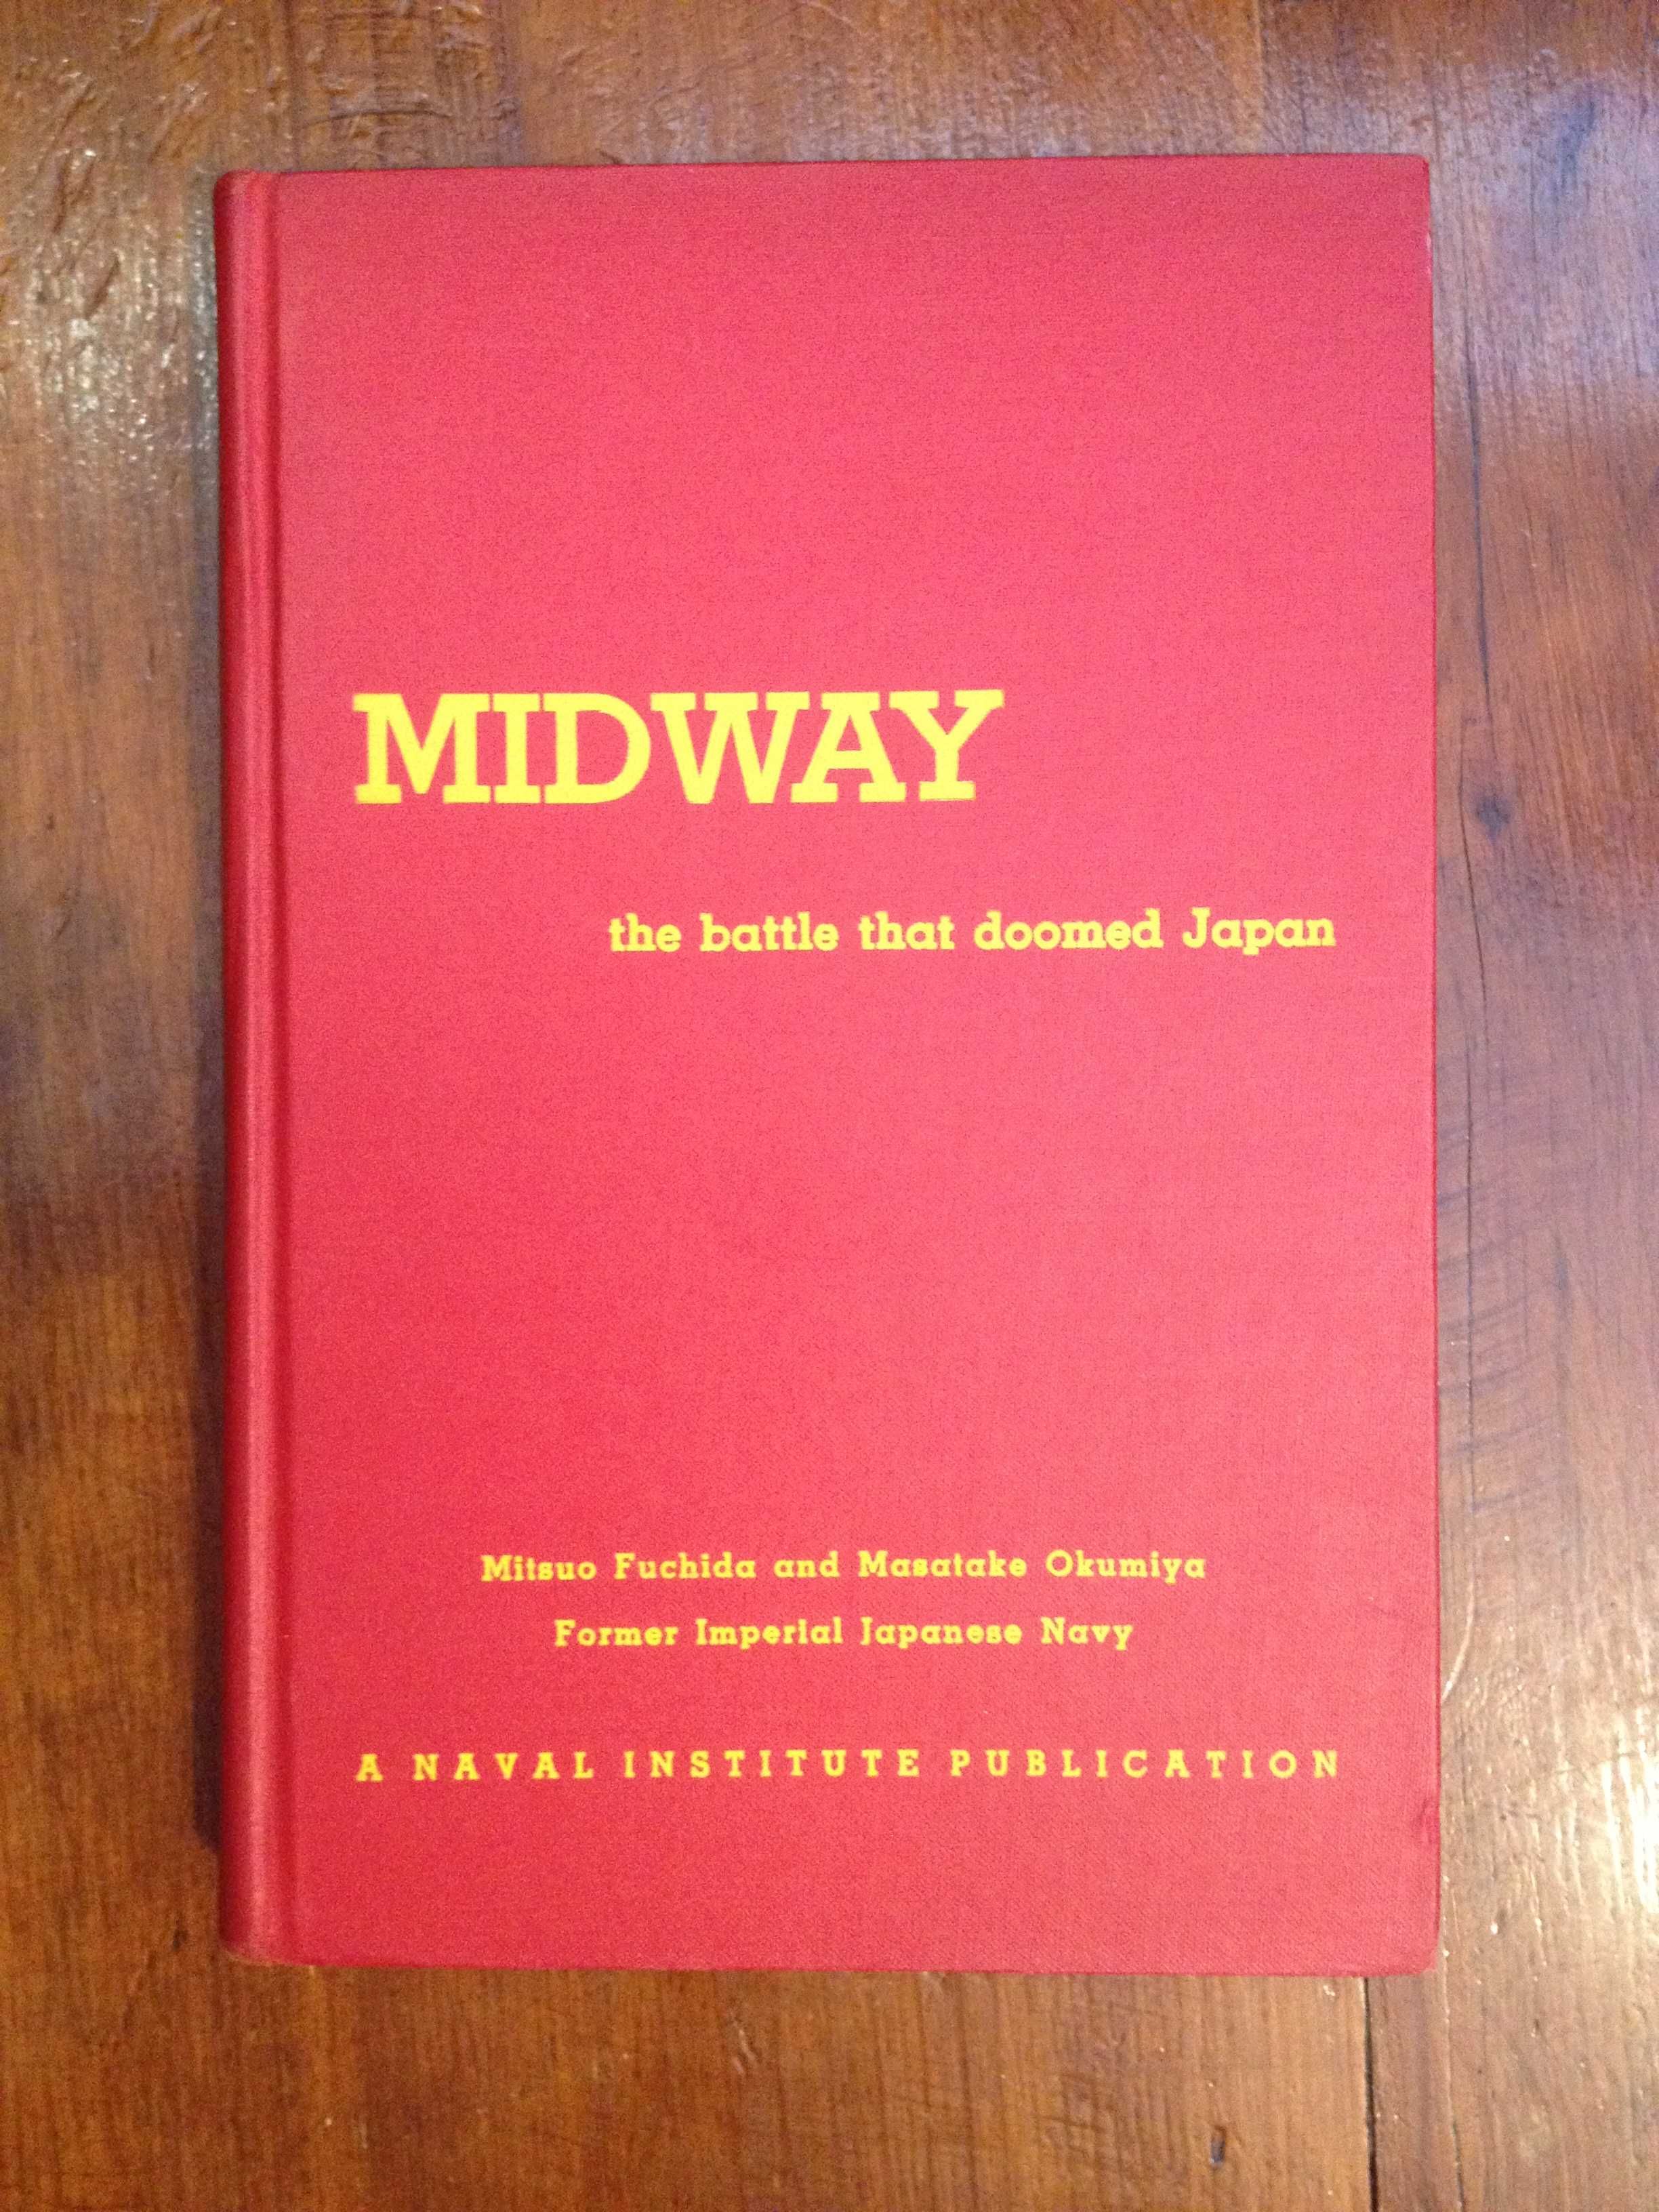 Midway, the battle that doomed Japan